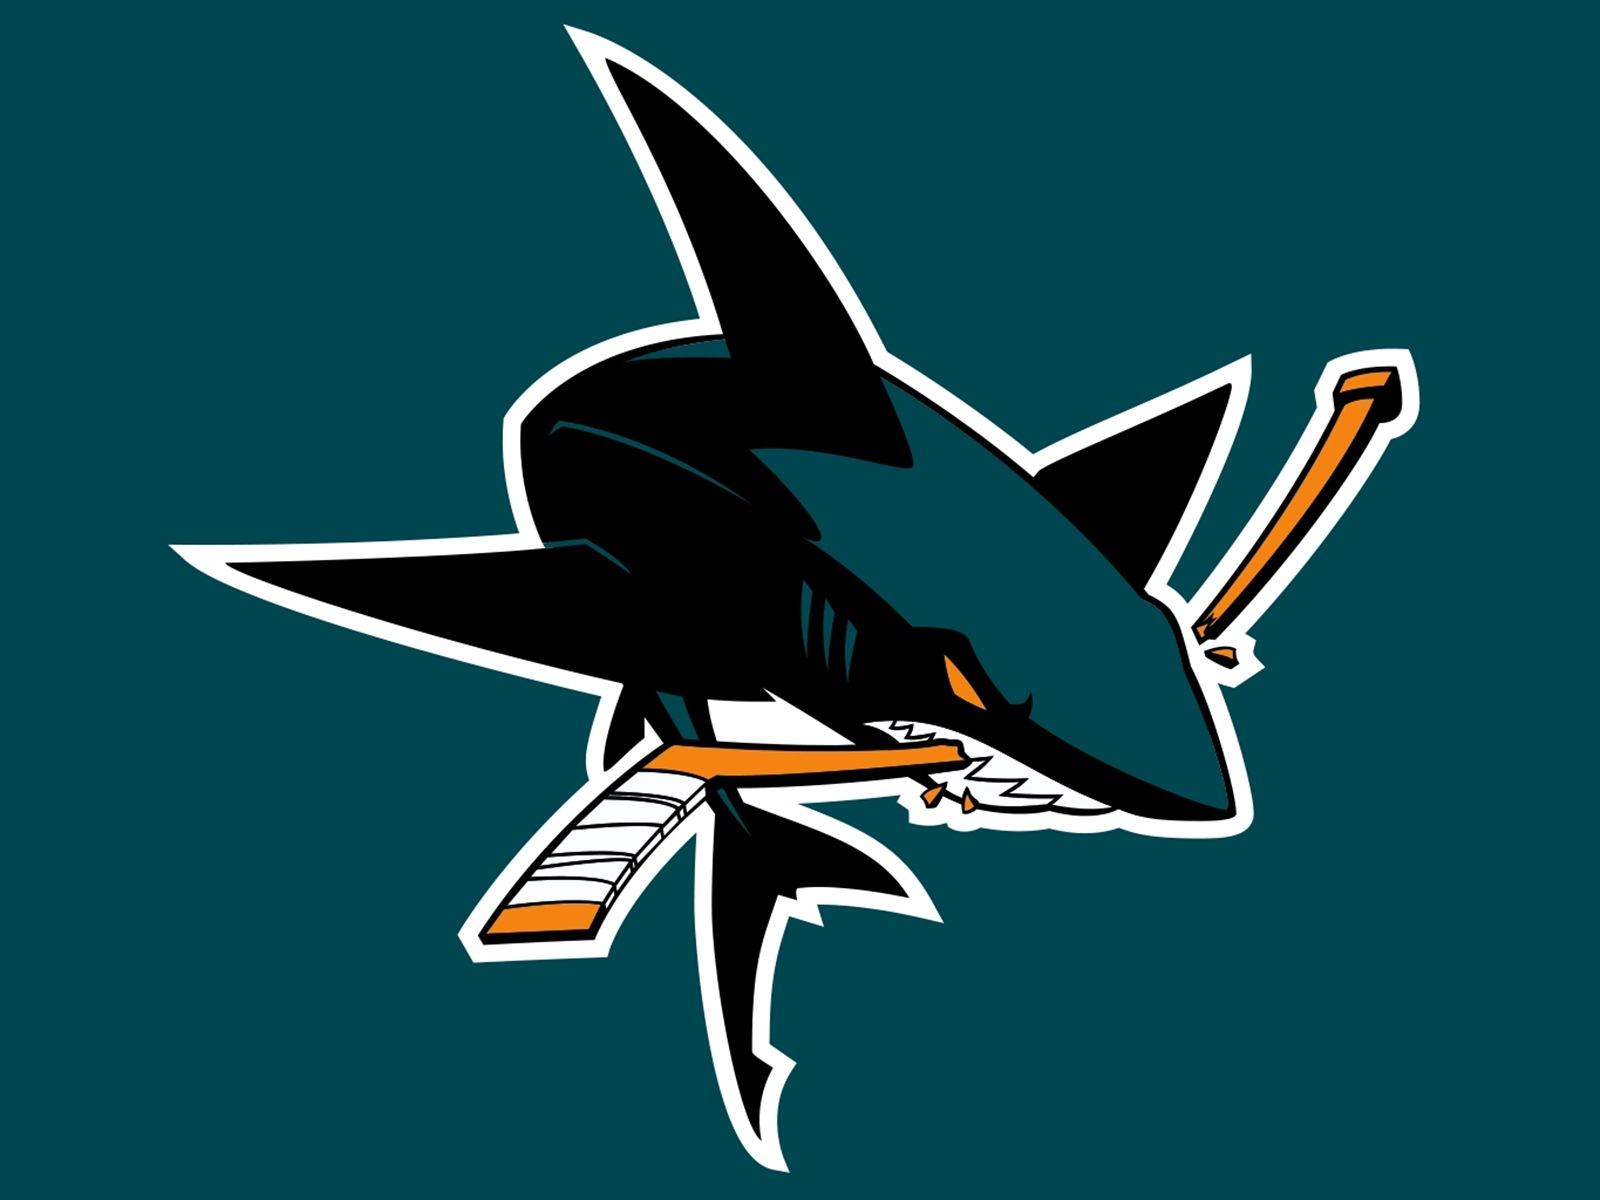  Wallpapers Backgrounds   San Jose Sharks Wallpaper Nuke Picture 1600x1200